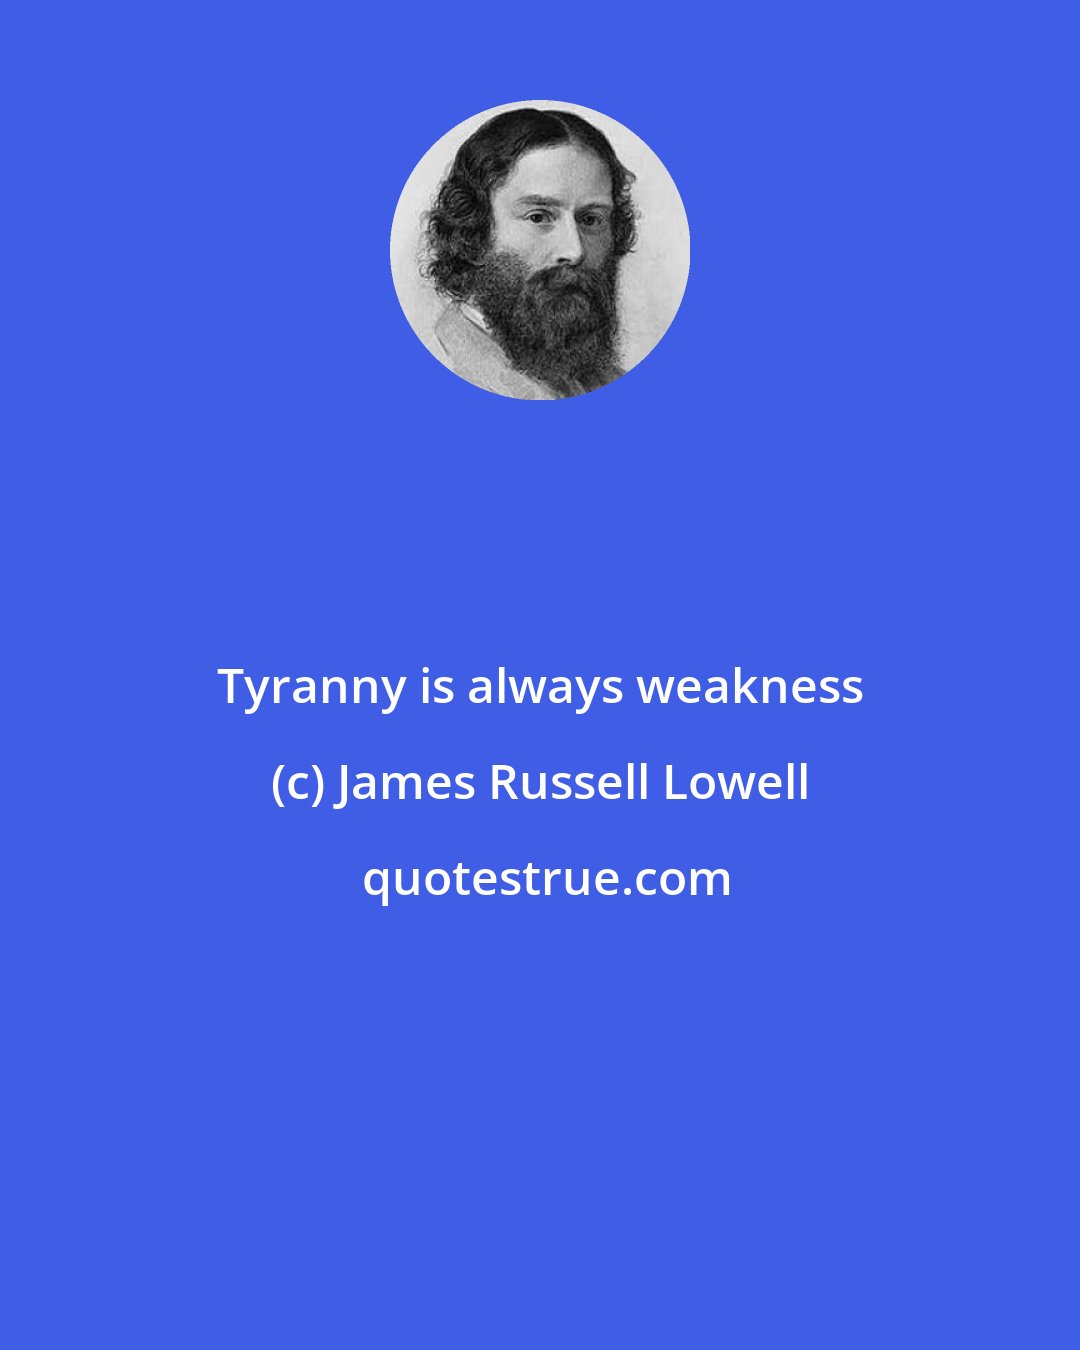 James Russell Lowell: Tyranny is always weakness